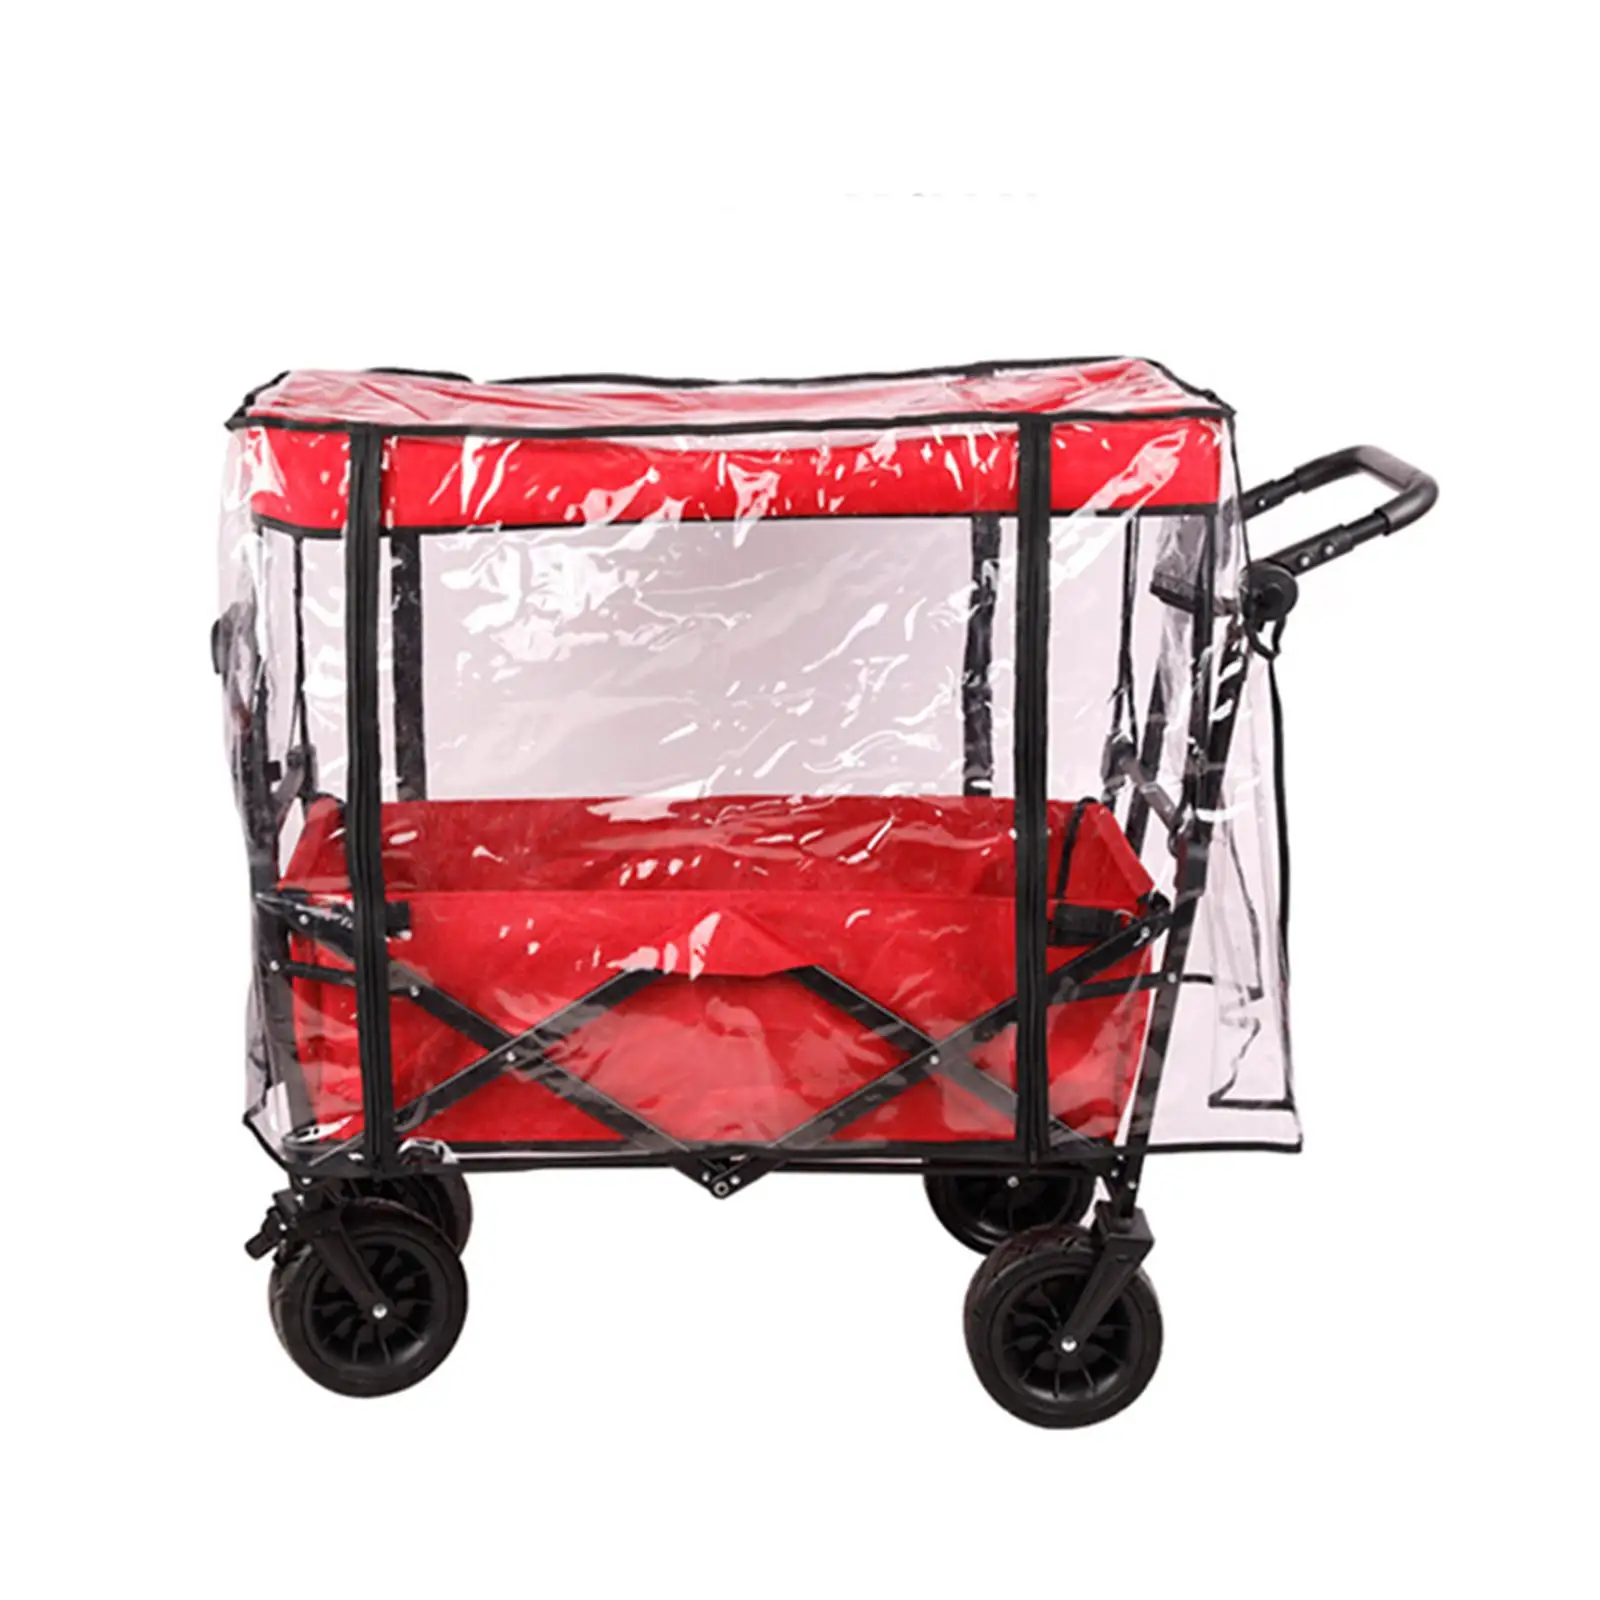 Collapsible Wagon Cart Waterproof Cover Canopy PVC Material 85x40x70cm Portable Sturdy Rainproof Windproof for Outdoor Garden